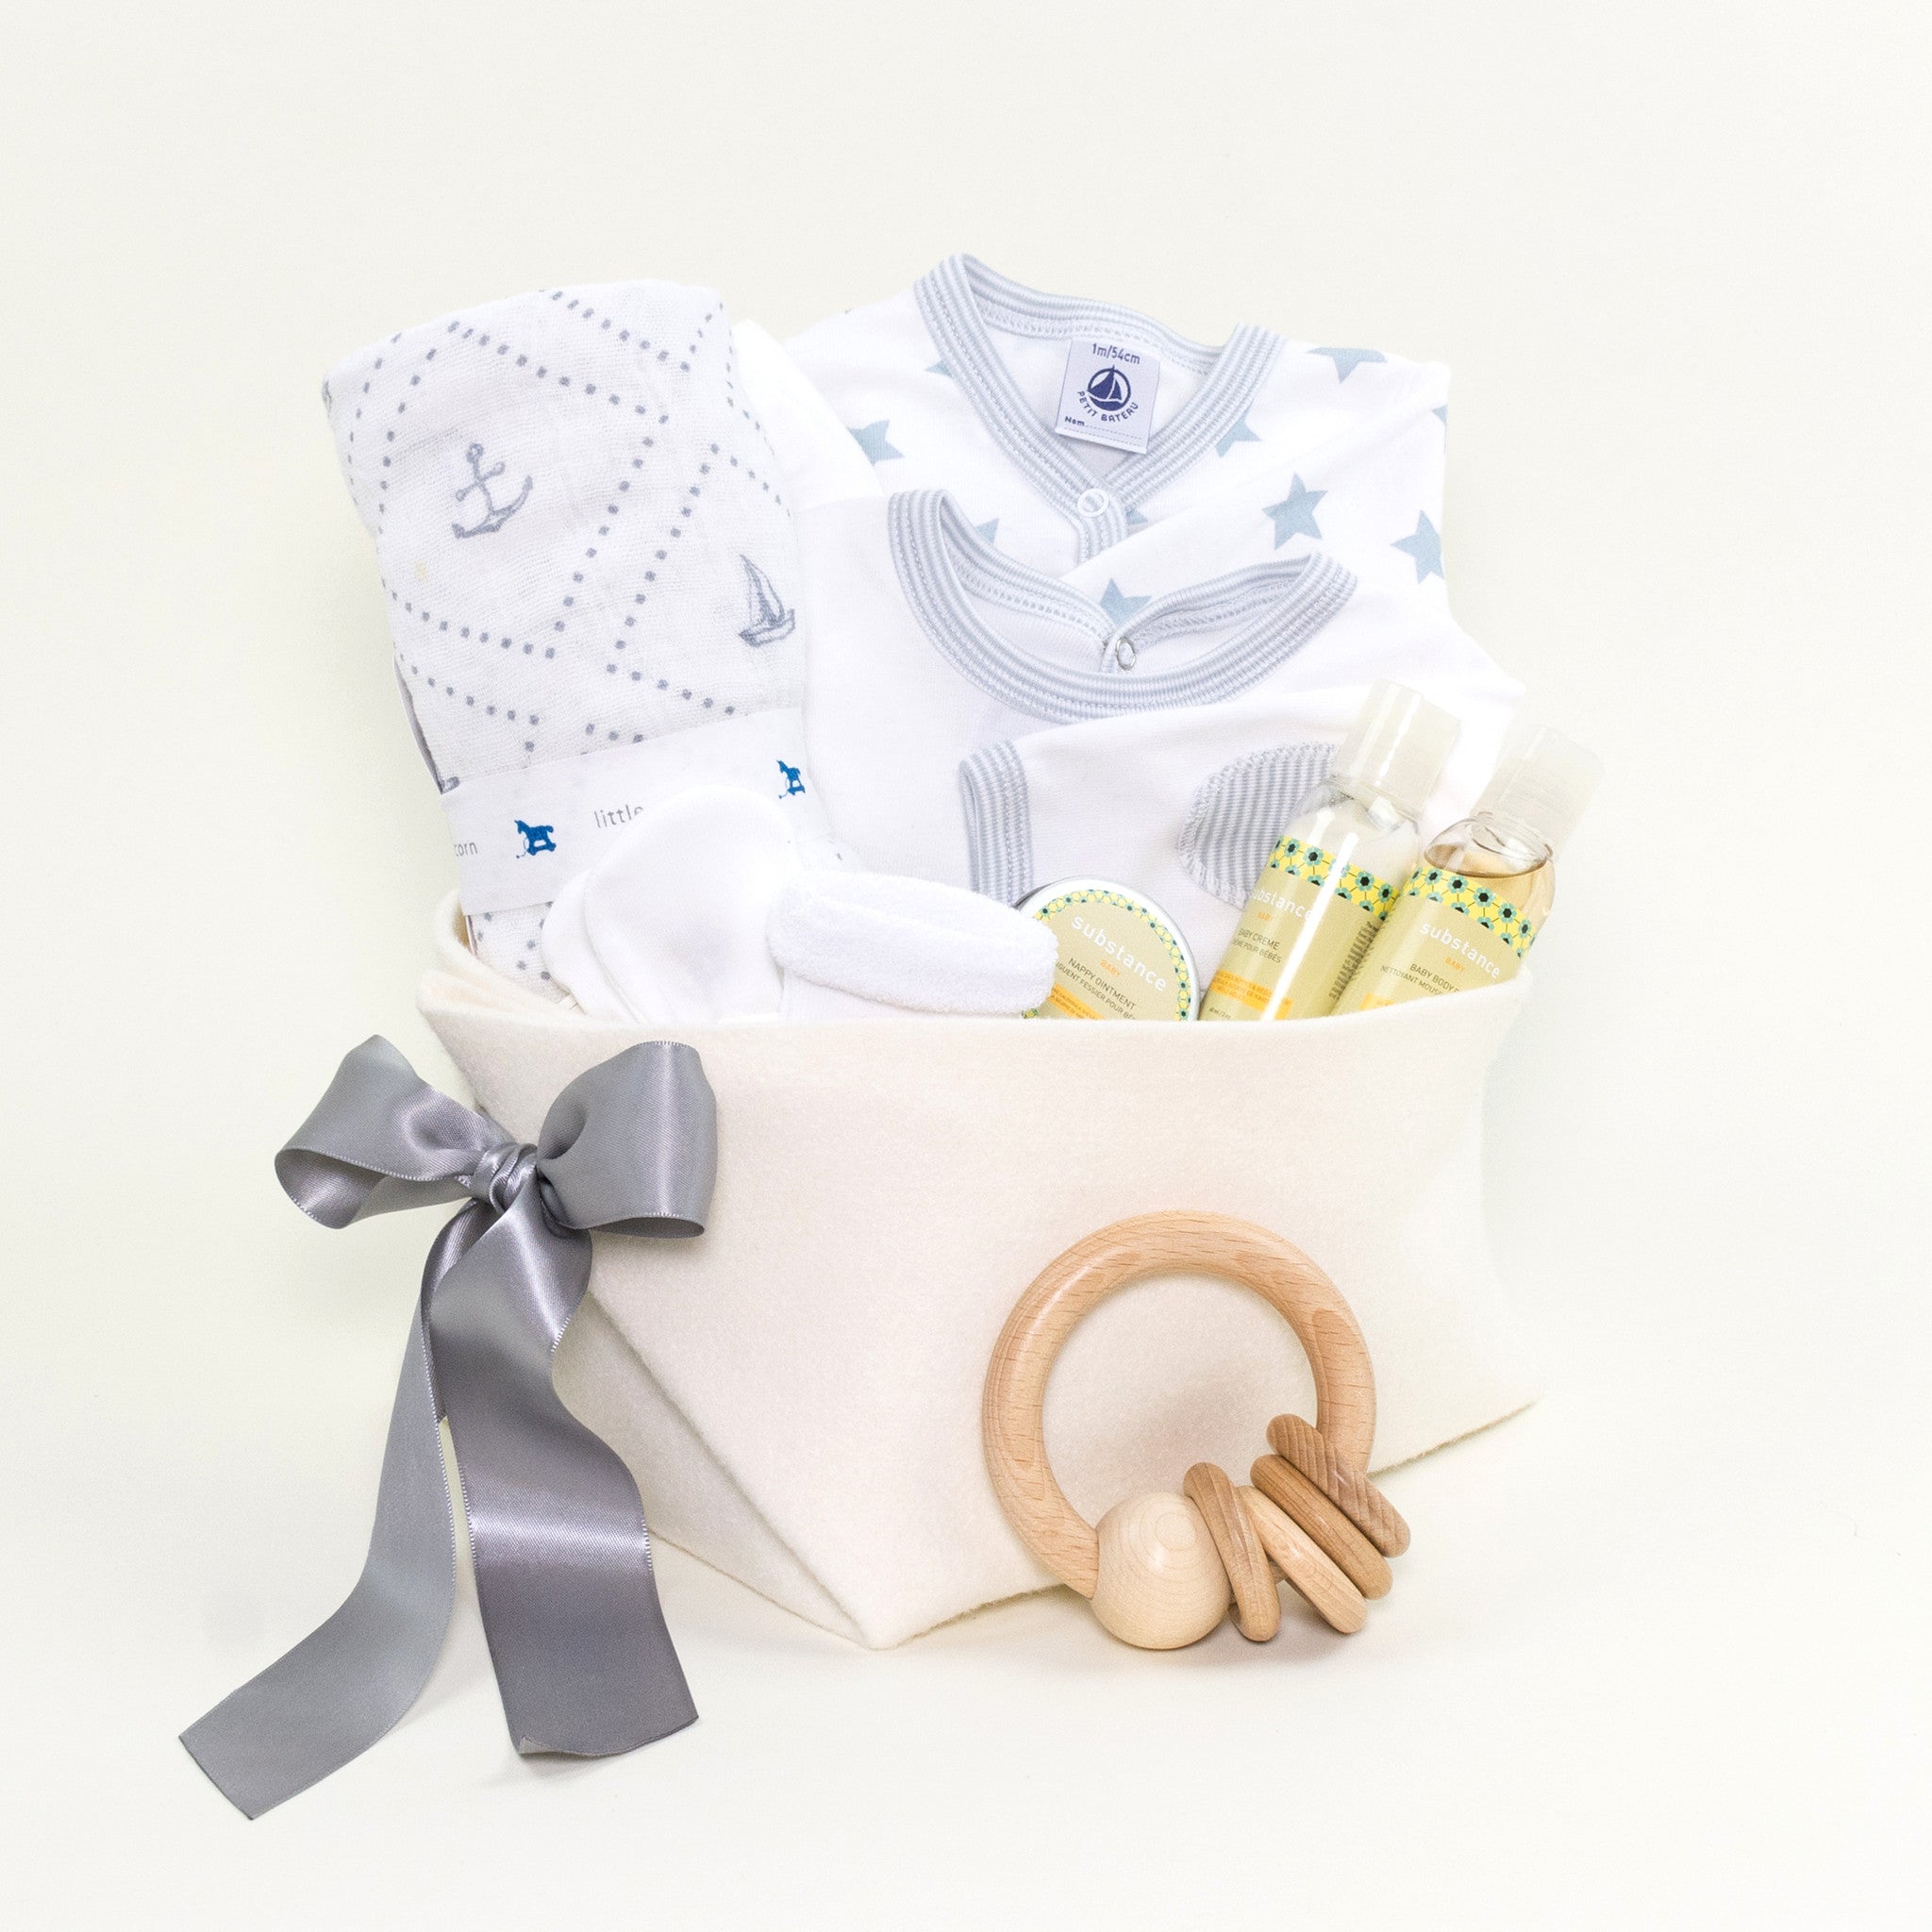 Luxury Baby Gift Basket featuring Matter Company Baby Products